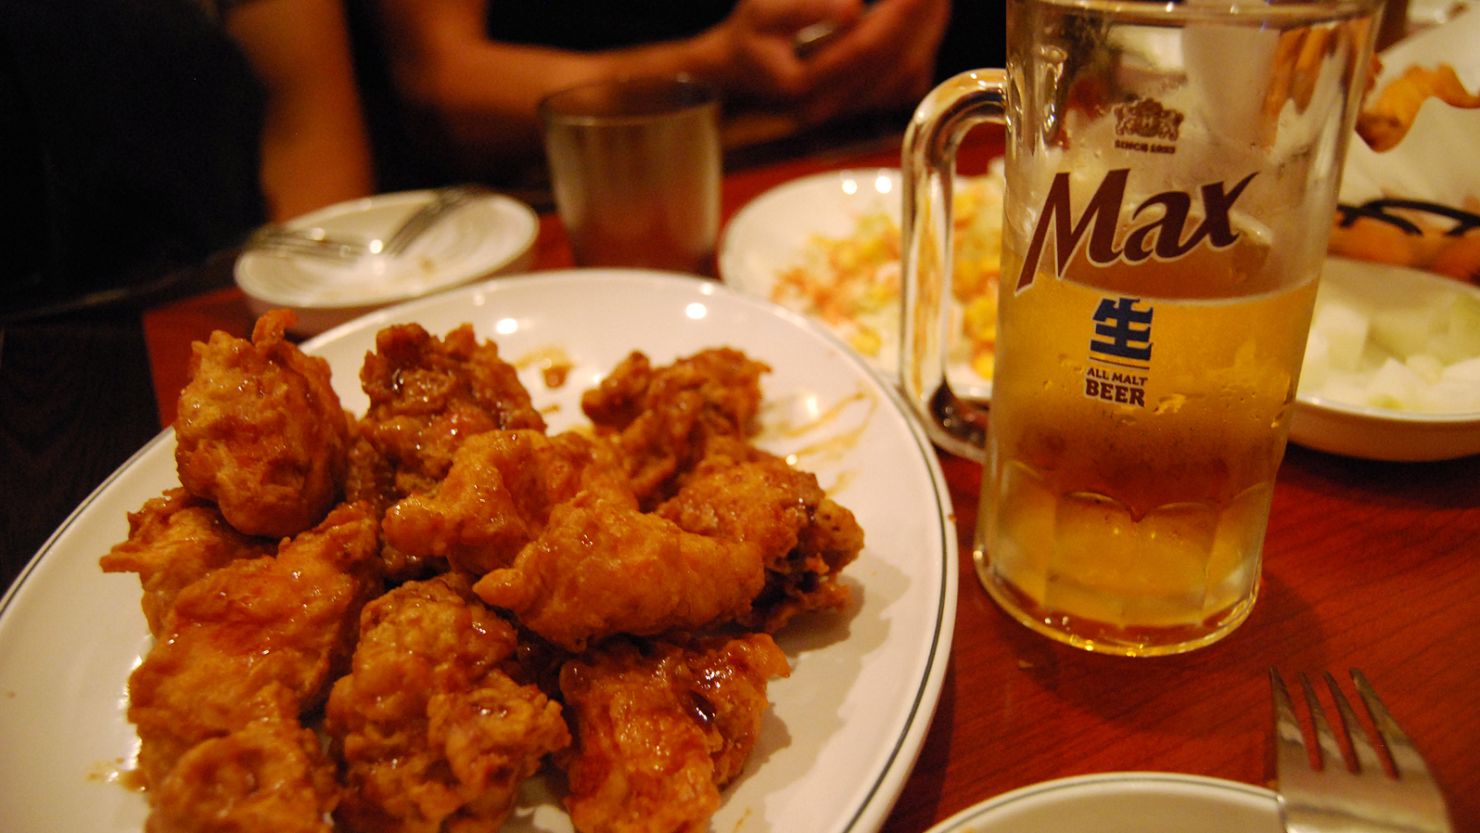 Chimaek -- the term used to describe the fried chicken (chi) and beer (maekju) combo -- has been thriving in South Korea for years but the world is only now catching on.